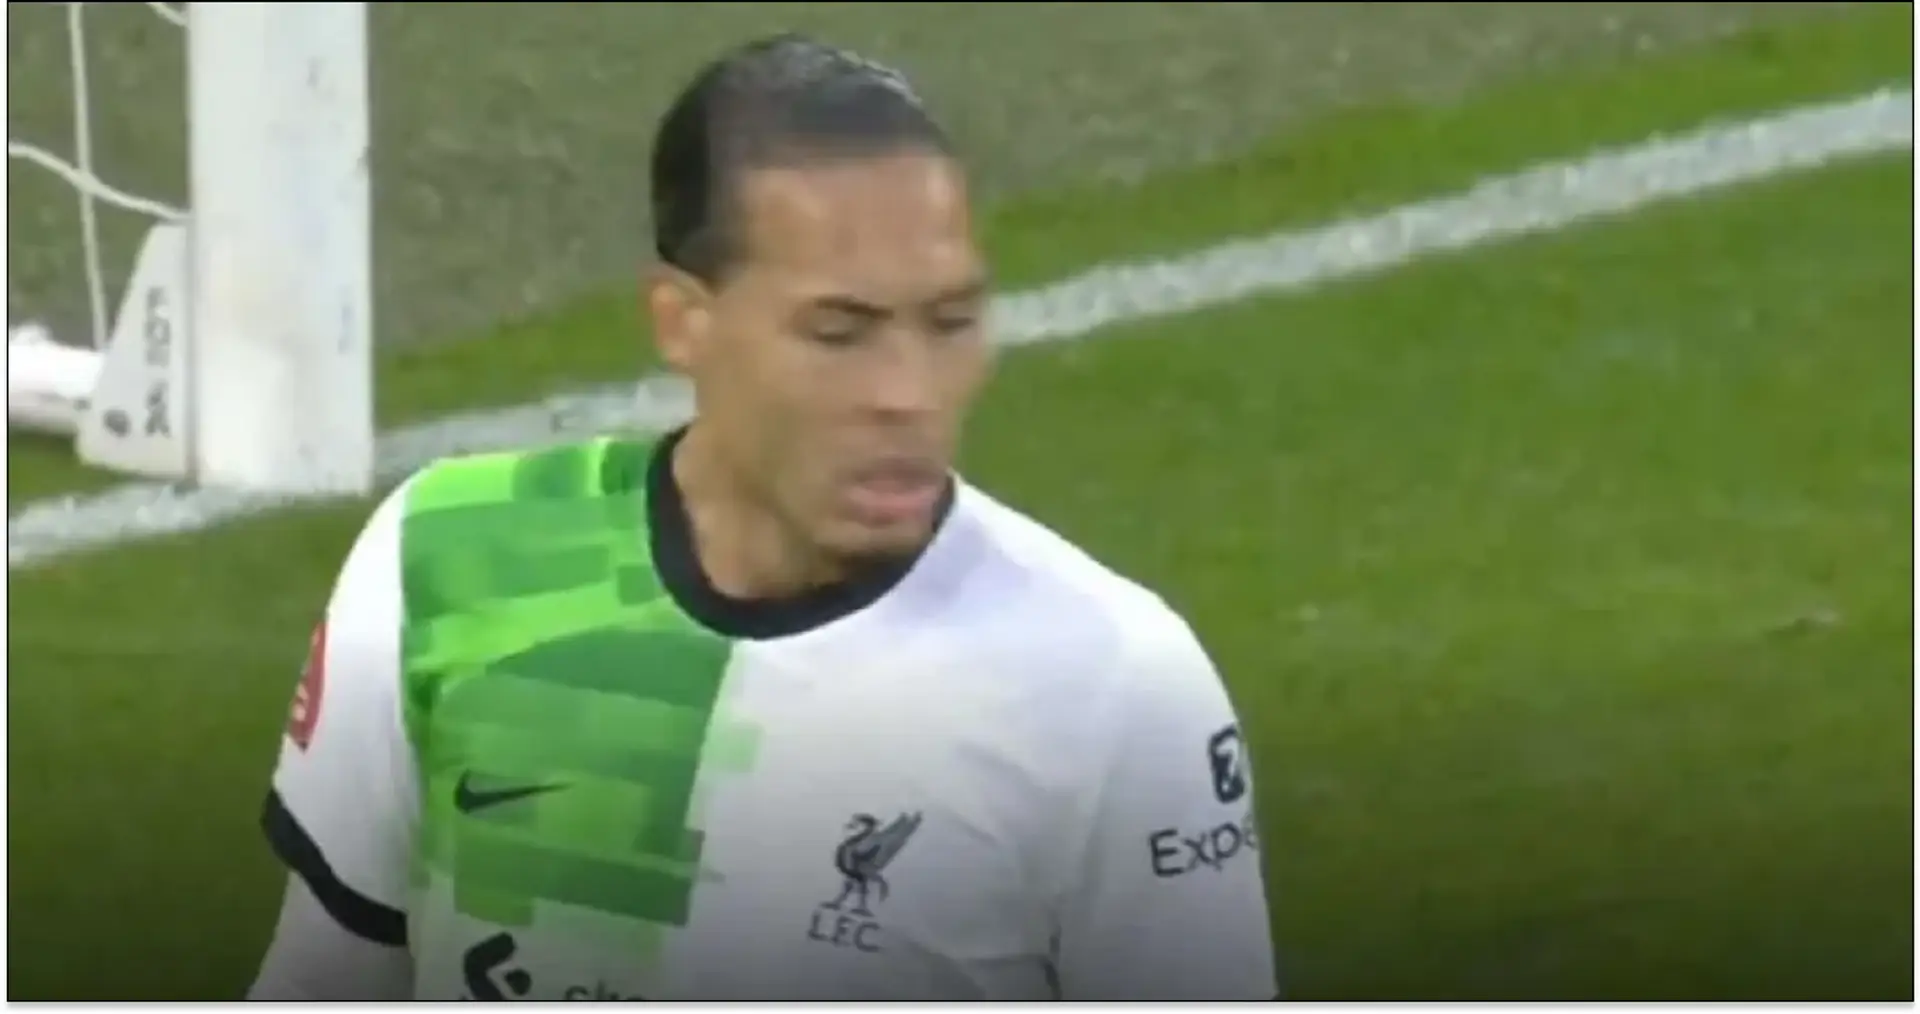 'Only got ourselves to blame': Van Dijk takes to social media after Man United defeat